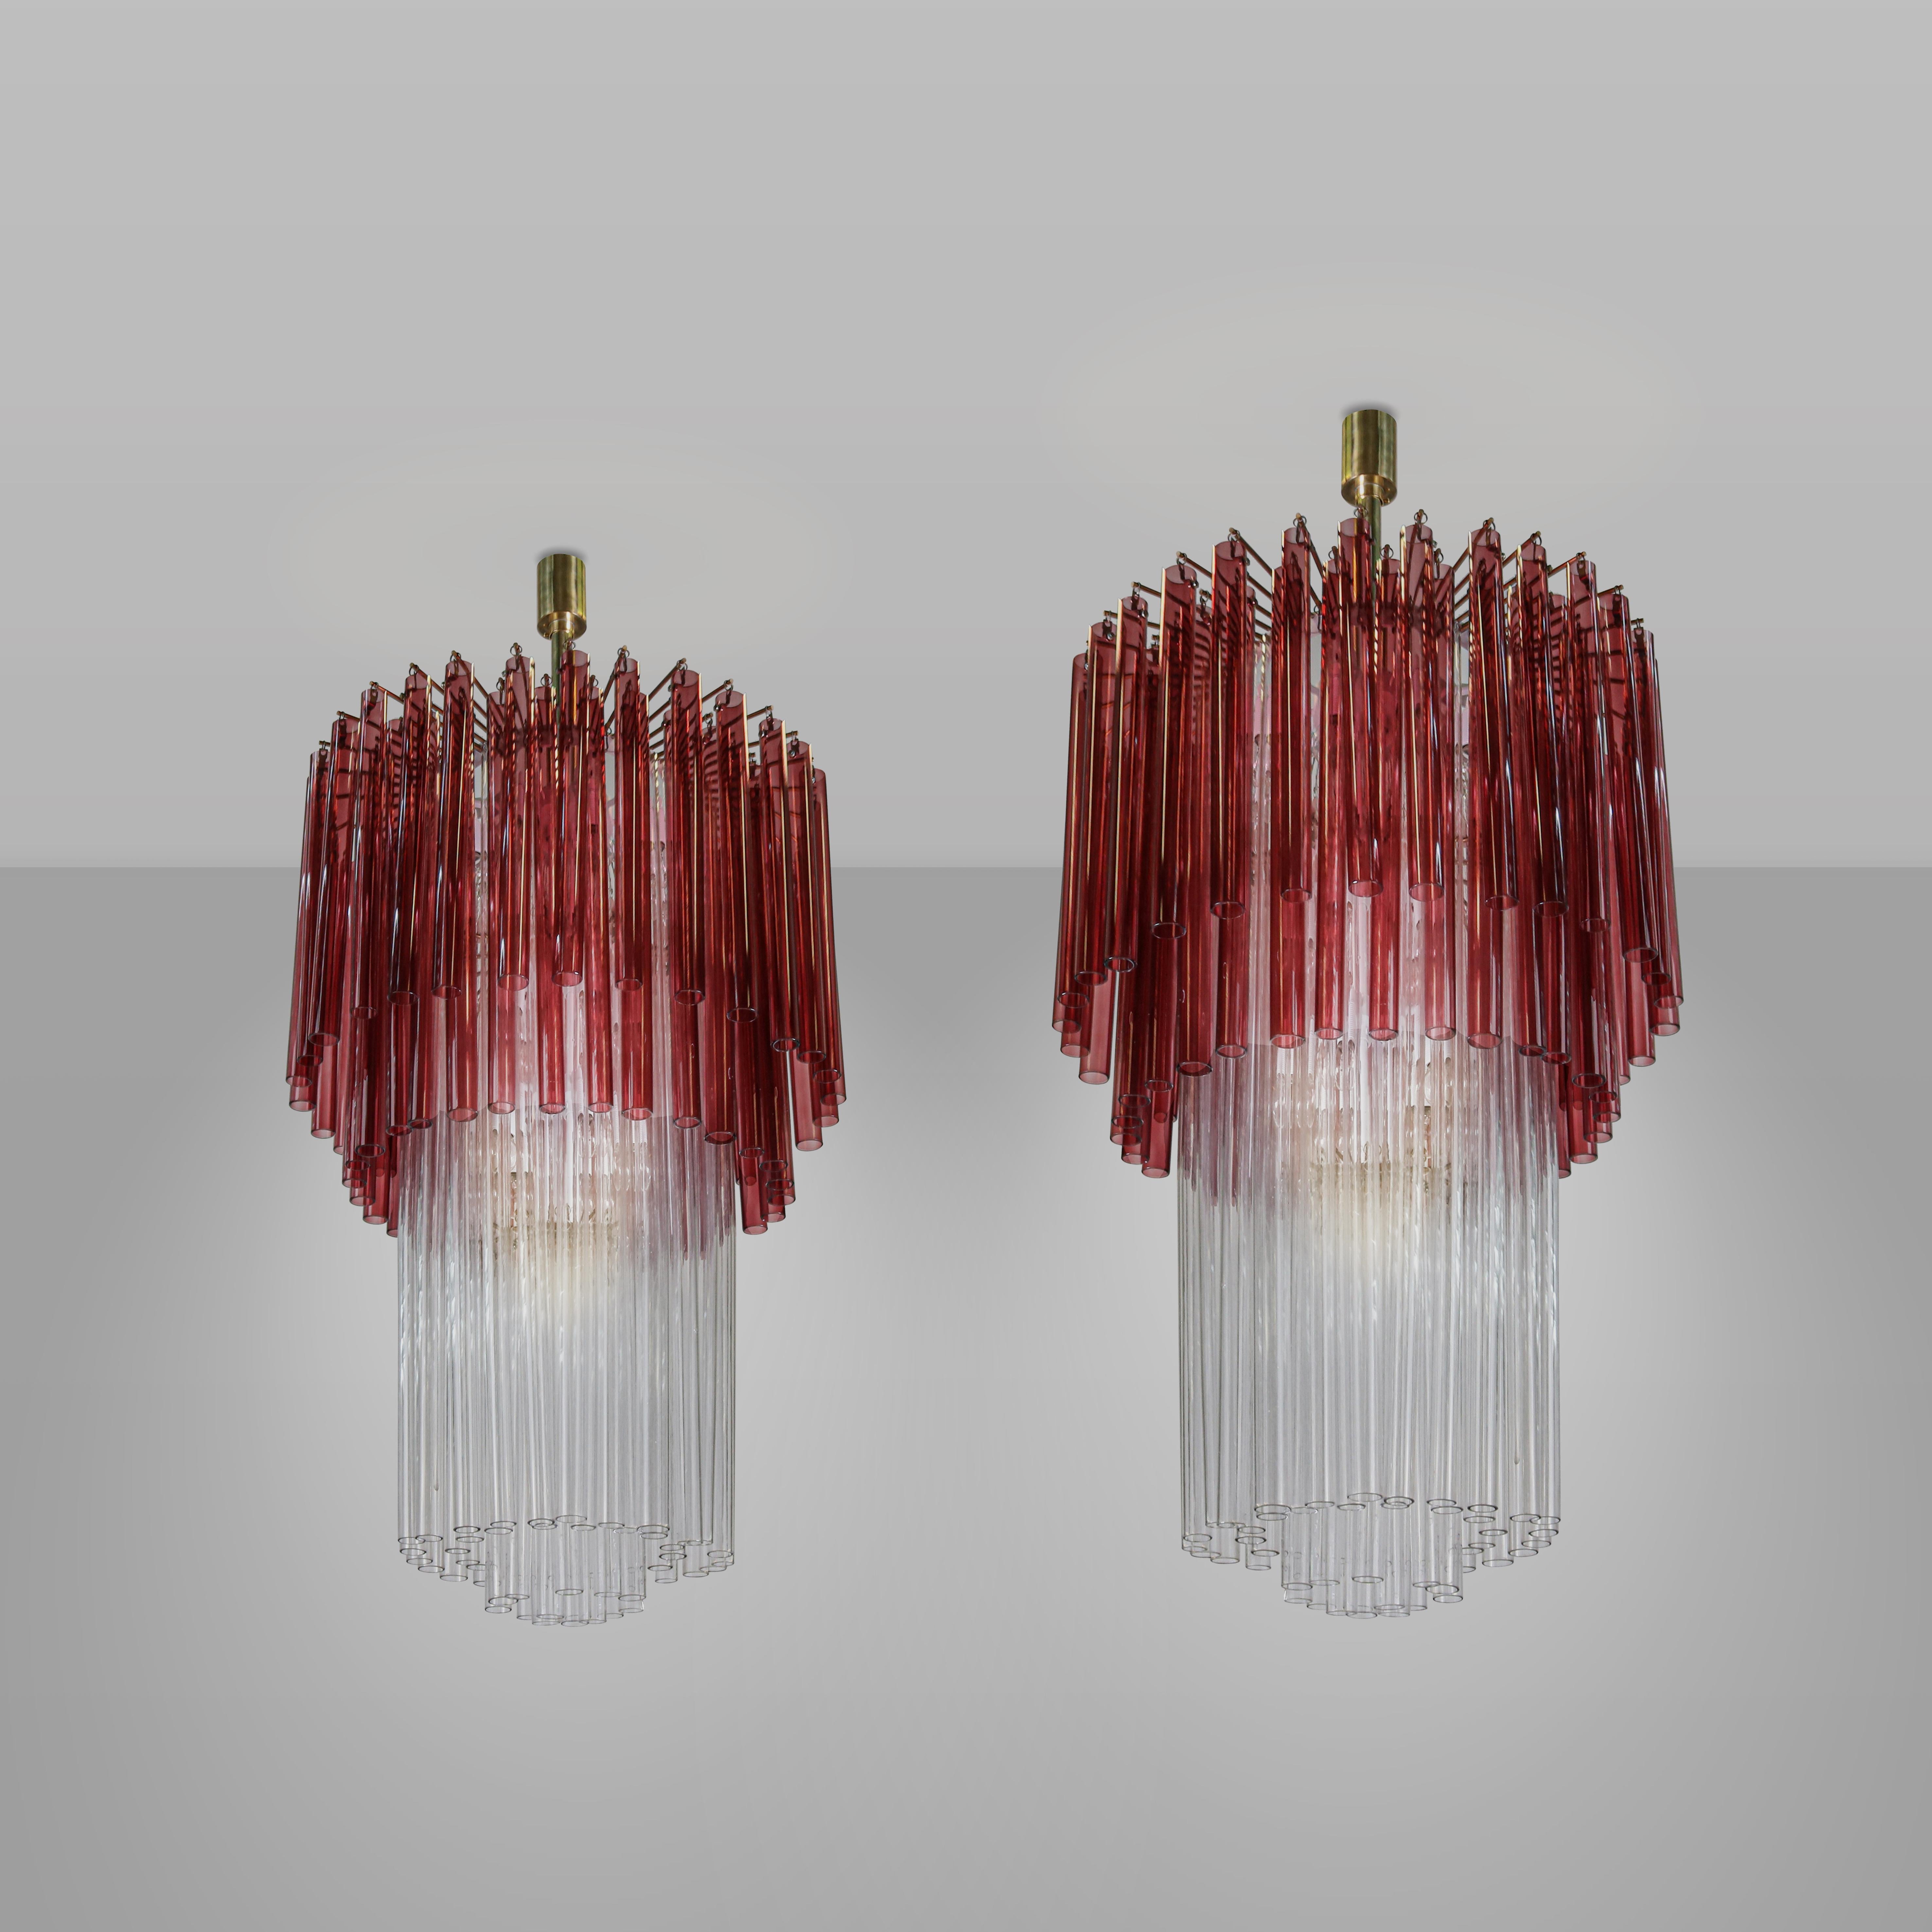 Pair of chandeliers with brass structure and beautiful decorative elements from Venini's Canne series, a classic that allows versatile conformations with relatively simple Murano glass elements to be combined in shapes and colors that are always